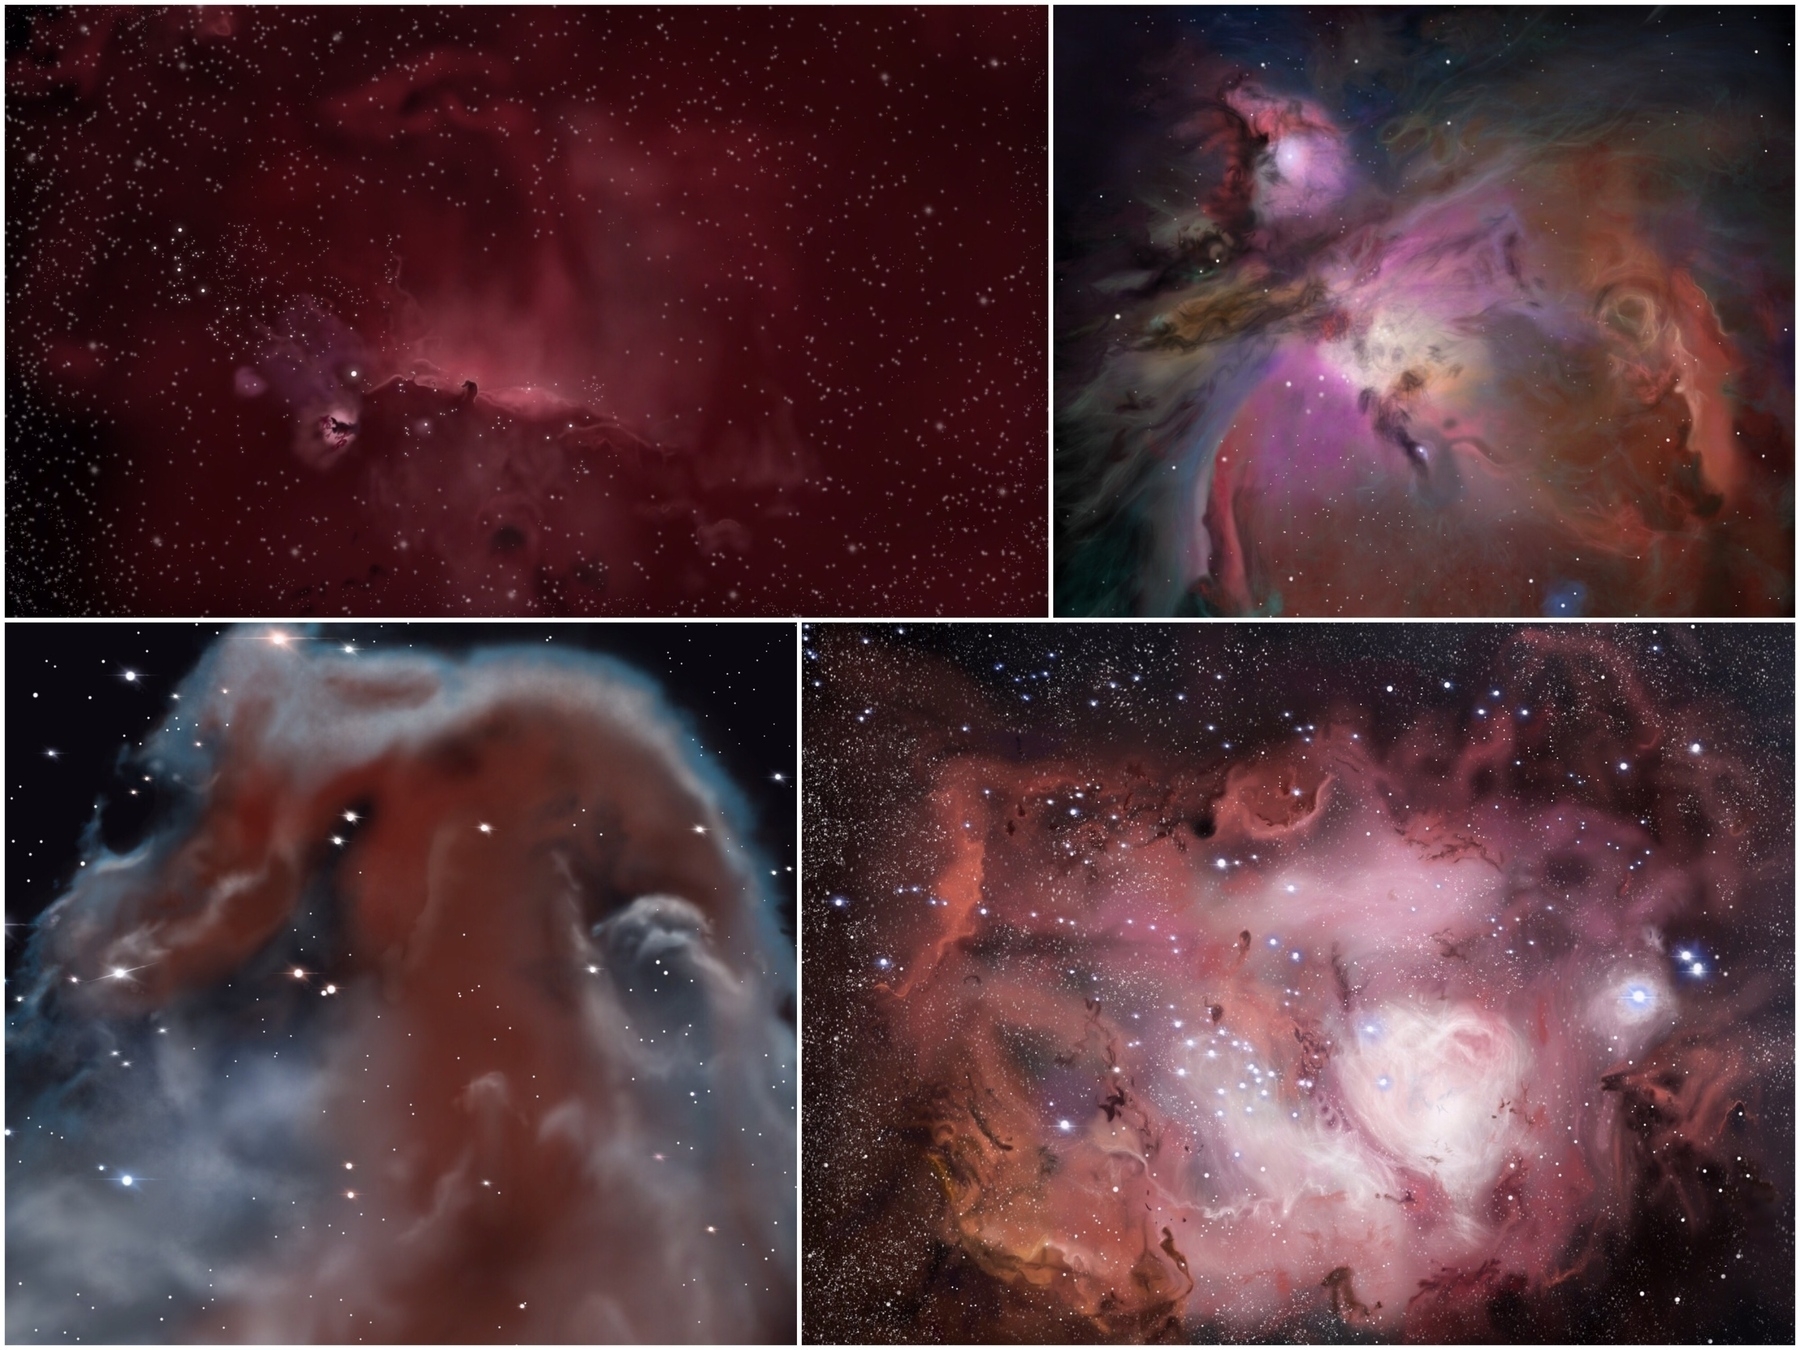 Clockwise from top left: In process IC 434 (tiny dark spot near the middle is the thick gas and dust of the Horsehead Nebula), Orion Nebula, Lagoon Nebula, close-up Horsehead Nebula in infrared